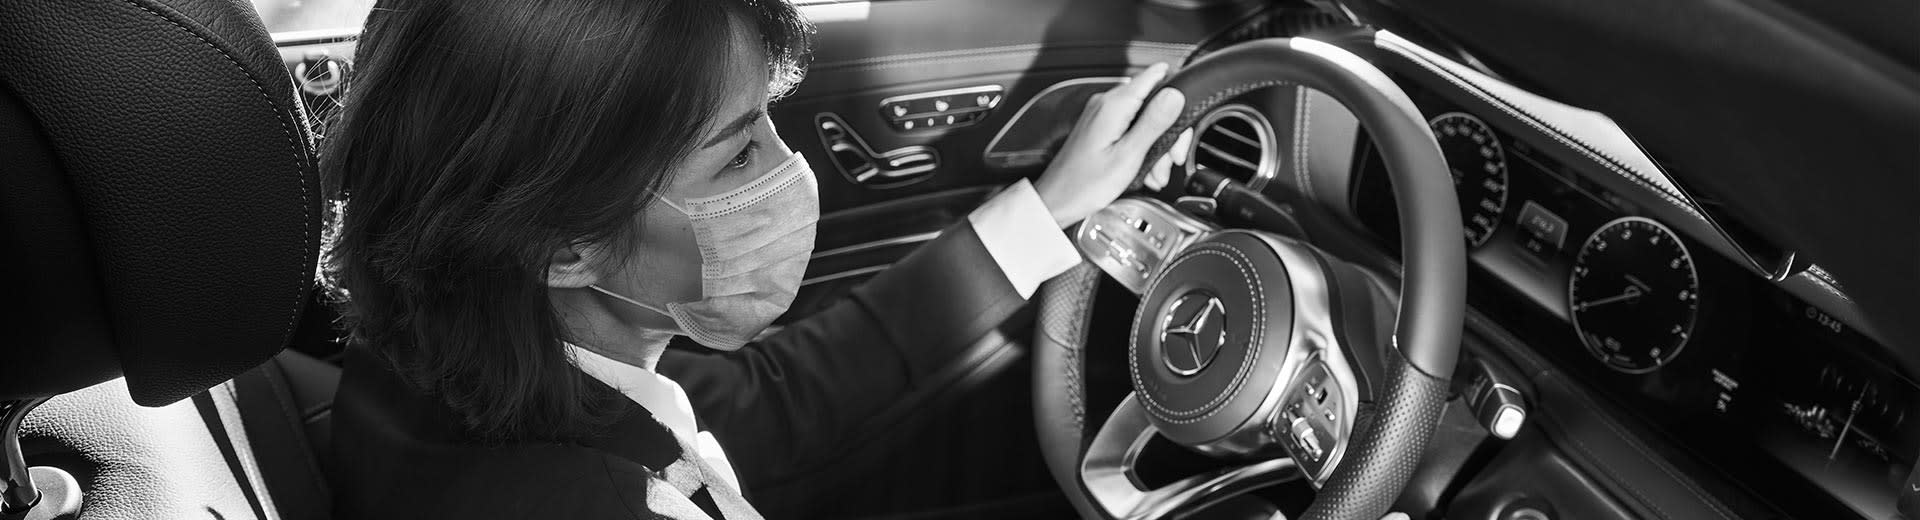 Real Blacklane chauffeur Yen sits behind the wheel of a Mercedes while wearing a face mask.